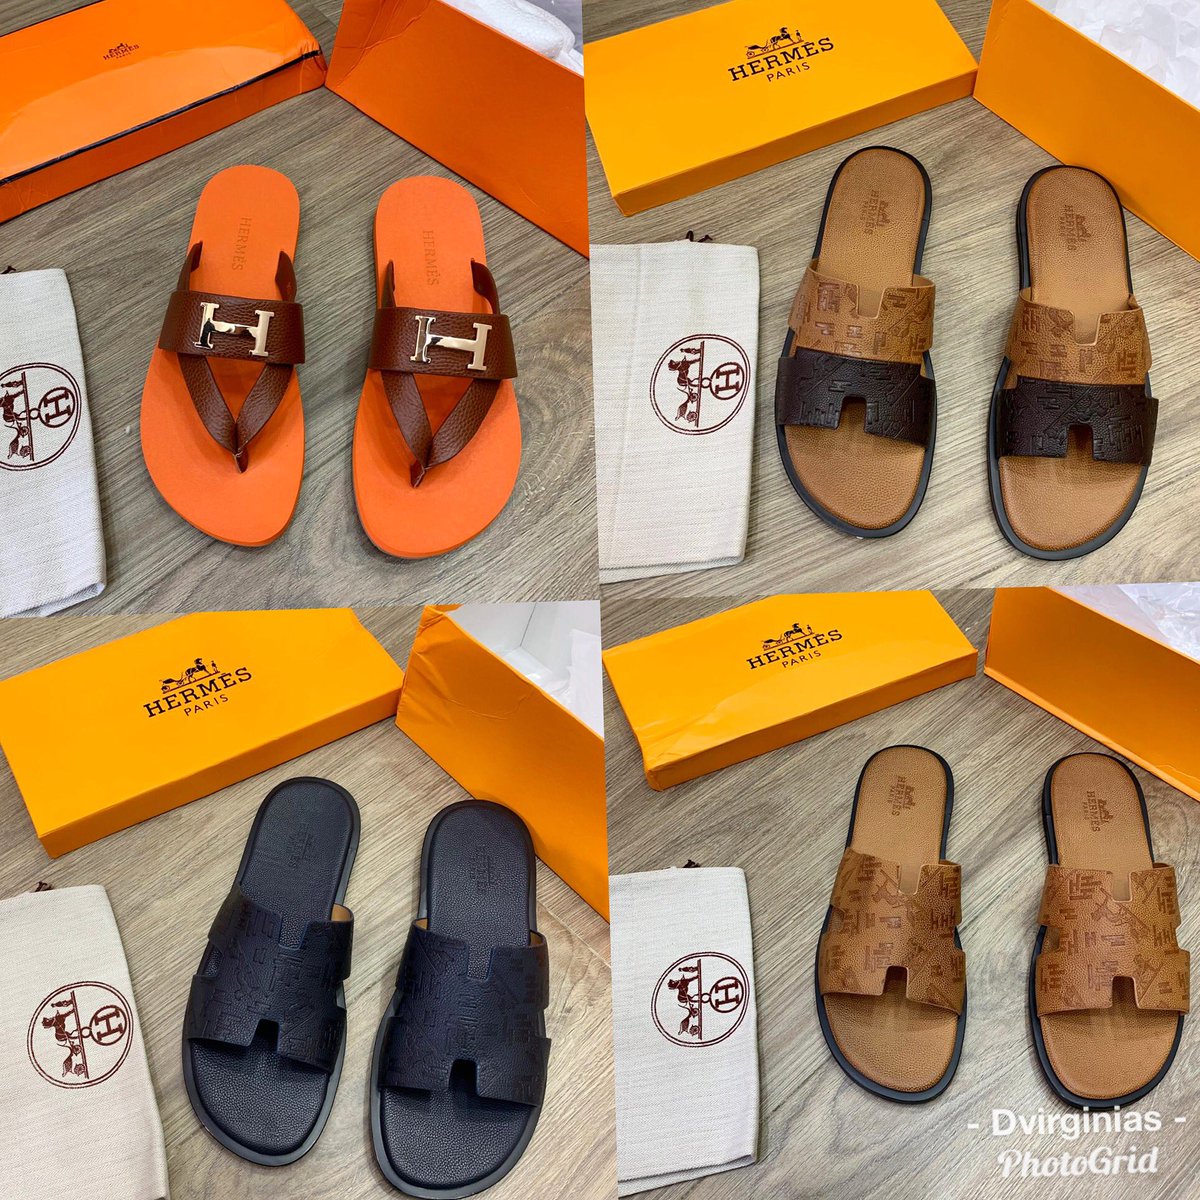 What are you wearing to slay that native attire you just made??? Oya come and buy one of these Pick any of our new slippers collection and get it delivered to your doorstepPrice: 25,000naira40-46Pls help Rt